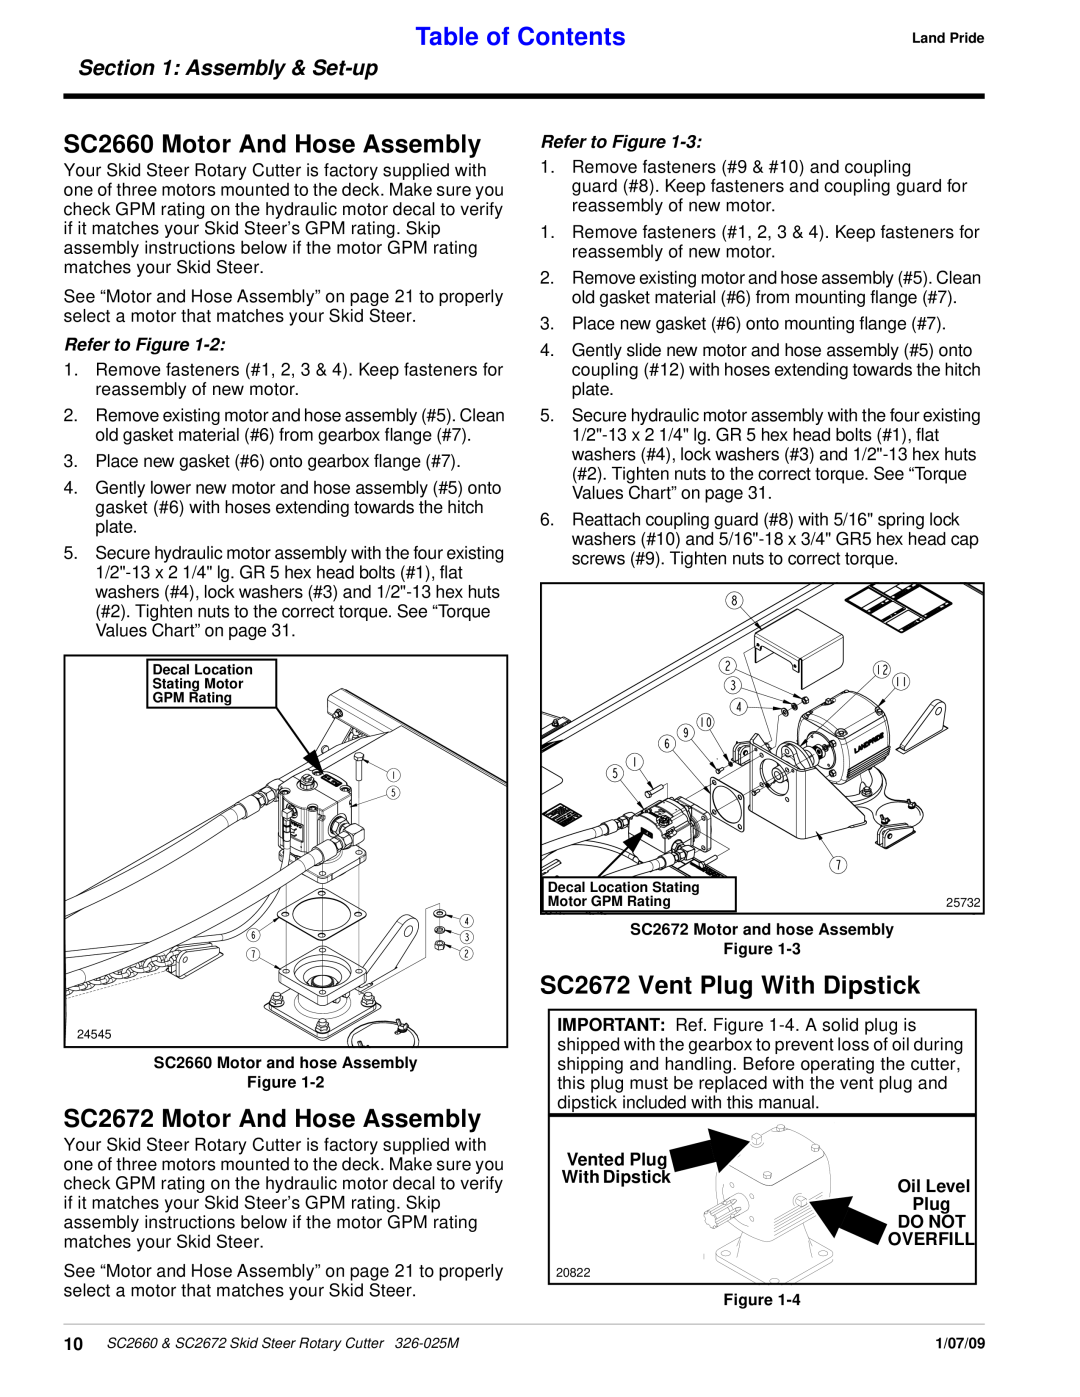 Land Pride manual SC2660 Motor And Hose Assembly, SC2672 Motor And Hose Assembly, SC2672 Vent Plug With Dipstick 